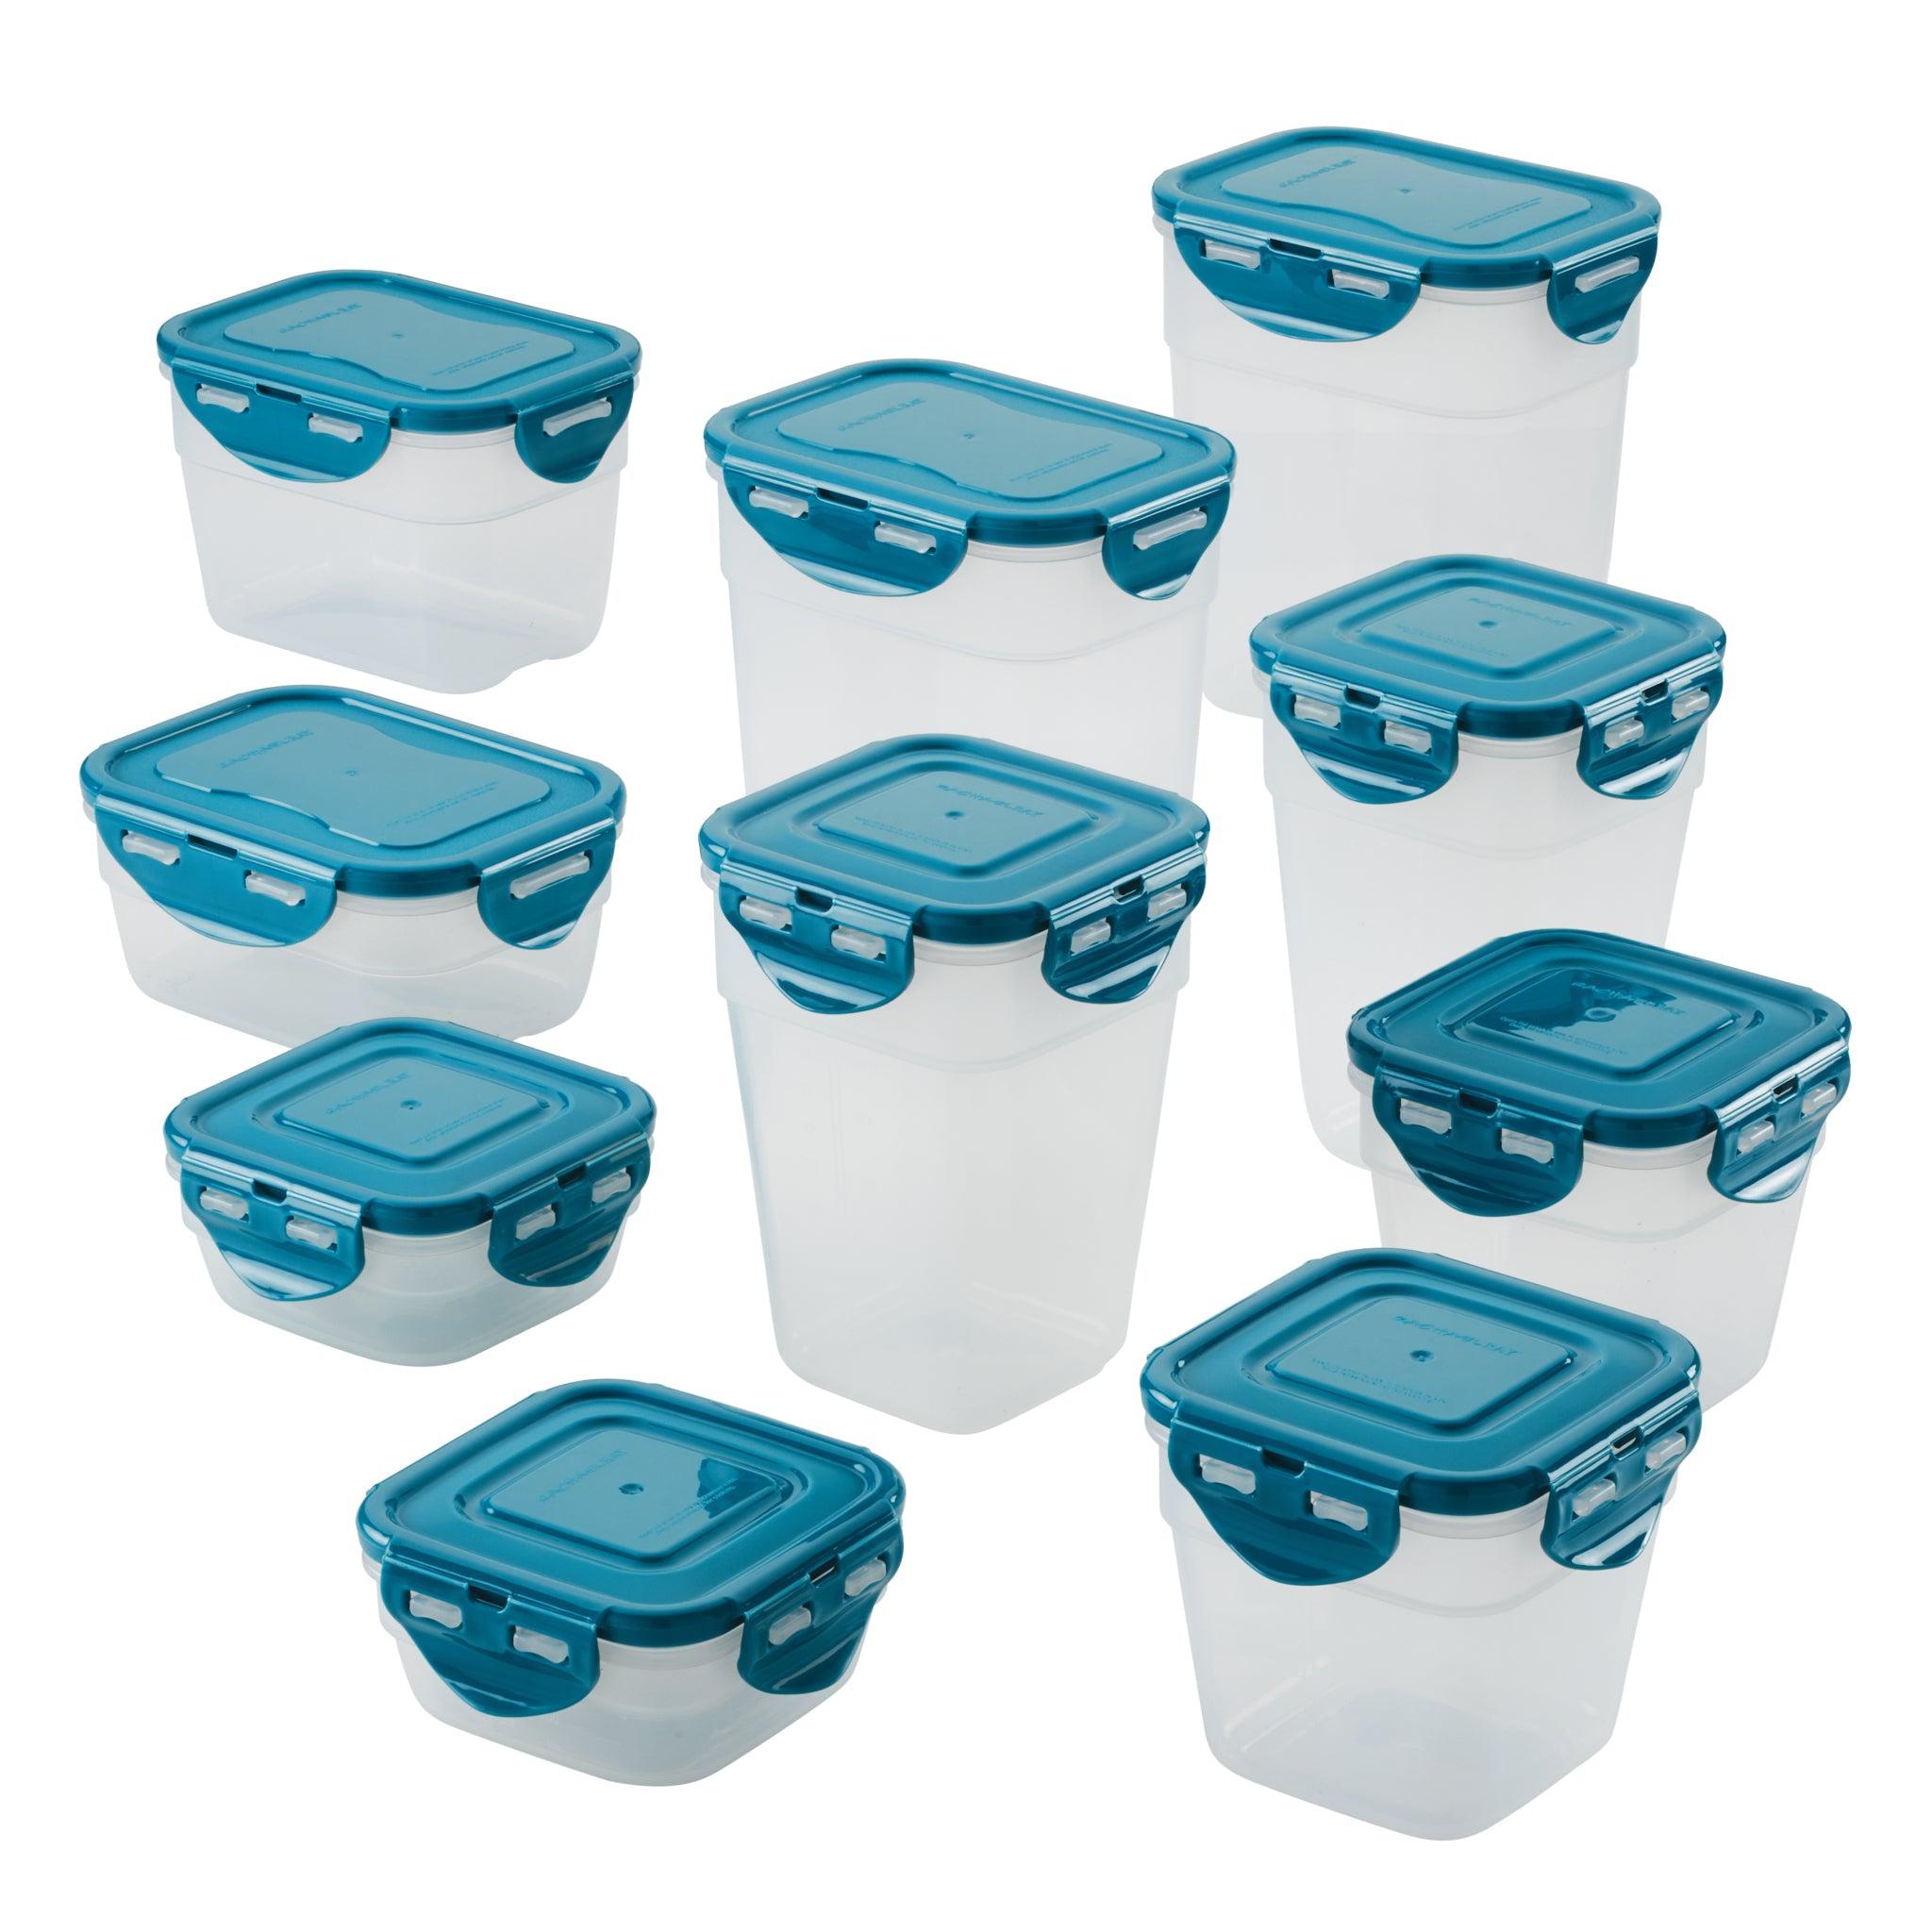 [20 Piece] Glass Food Storage Airtight & Leakproof Containers Set with Snap Lock